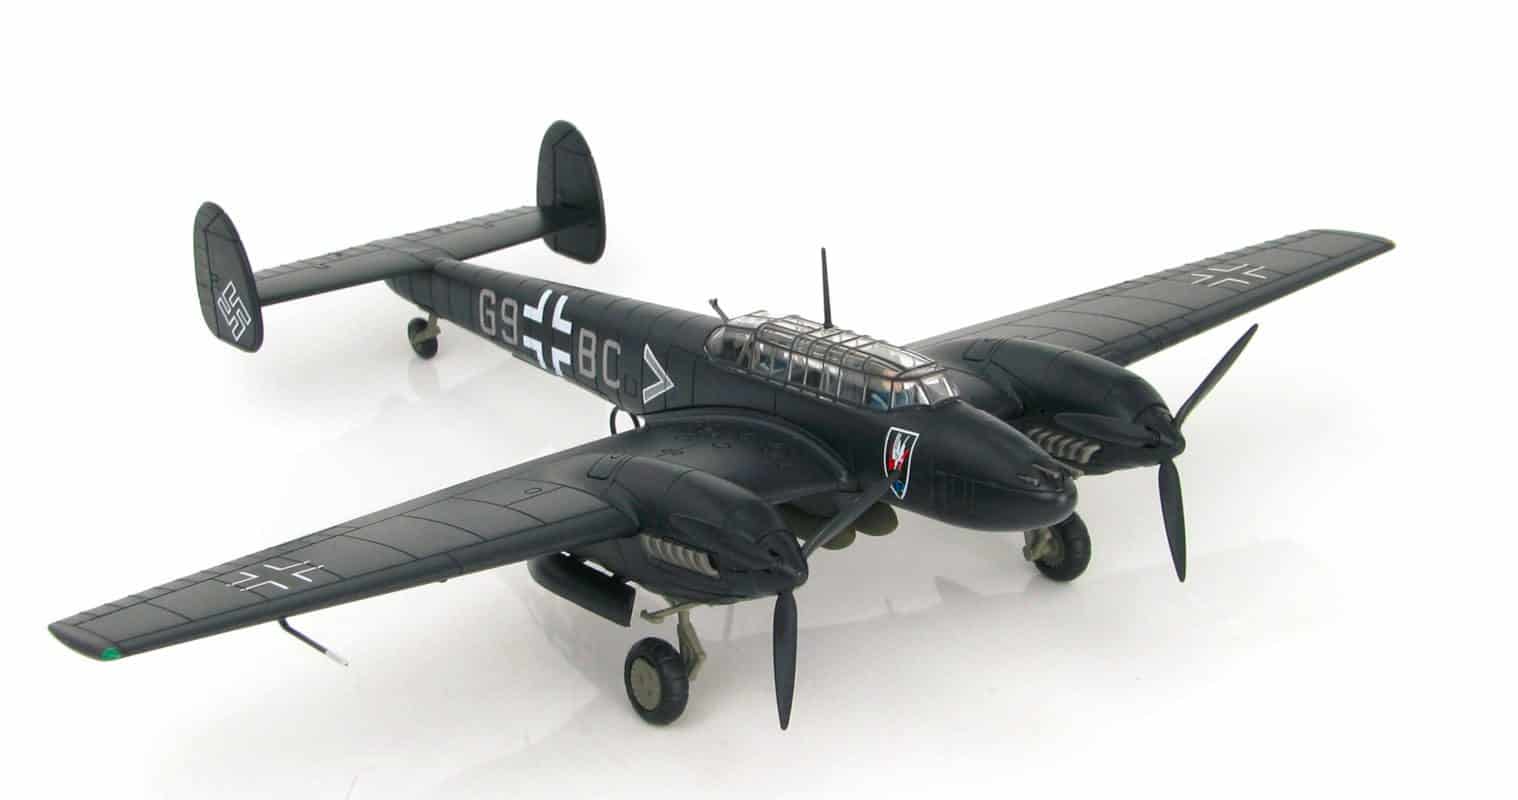 Front starboard side view of Hobby Master HA1814 - 1/72 scale diecast model Messerschmitt Bf 110E-2 with Geschwaderkennung G9+BC,  Pilot Oblt. Uellenbeck of II./N.JG 1 stationed in St Trond, France during 